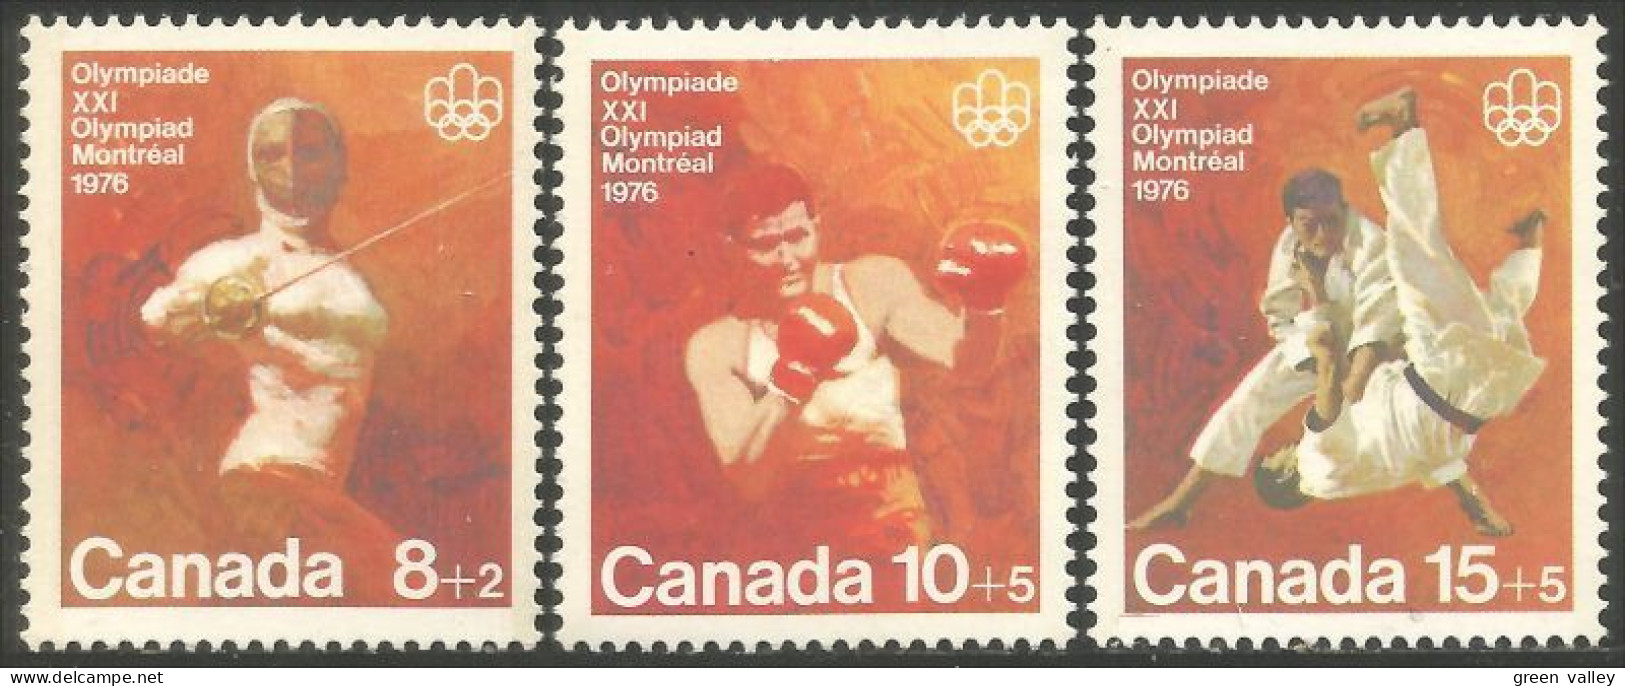 Canada Jeux Olympiques Montreal 1976 Olympic Games MNH ** Neuf SC (CB-07-09c) - Sommer 1976: Montreal